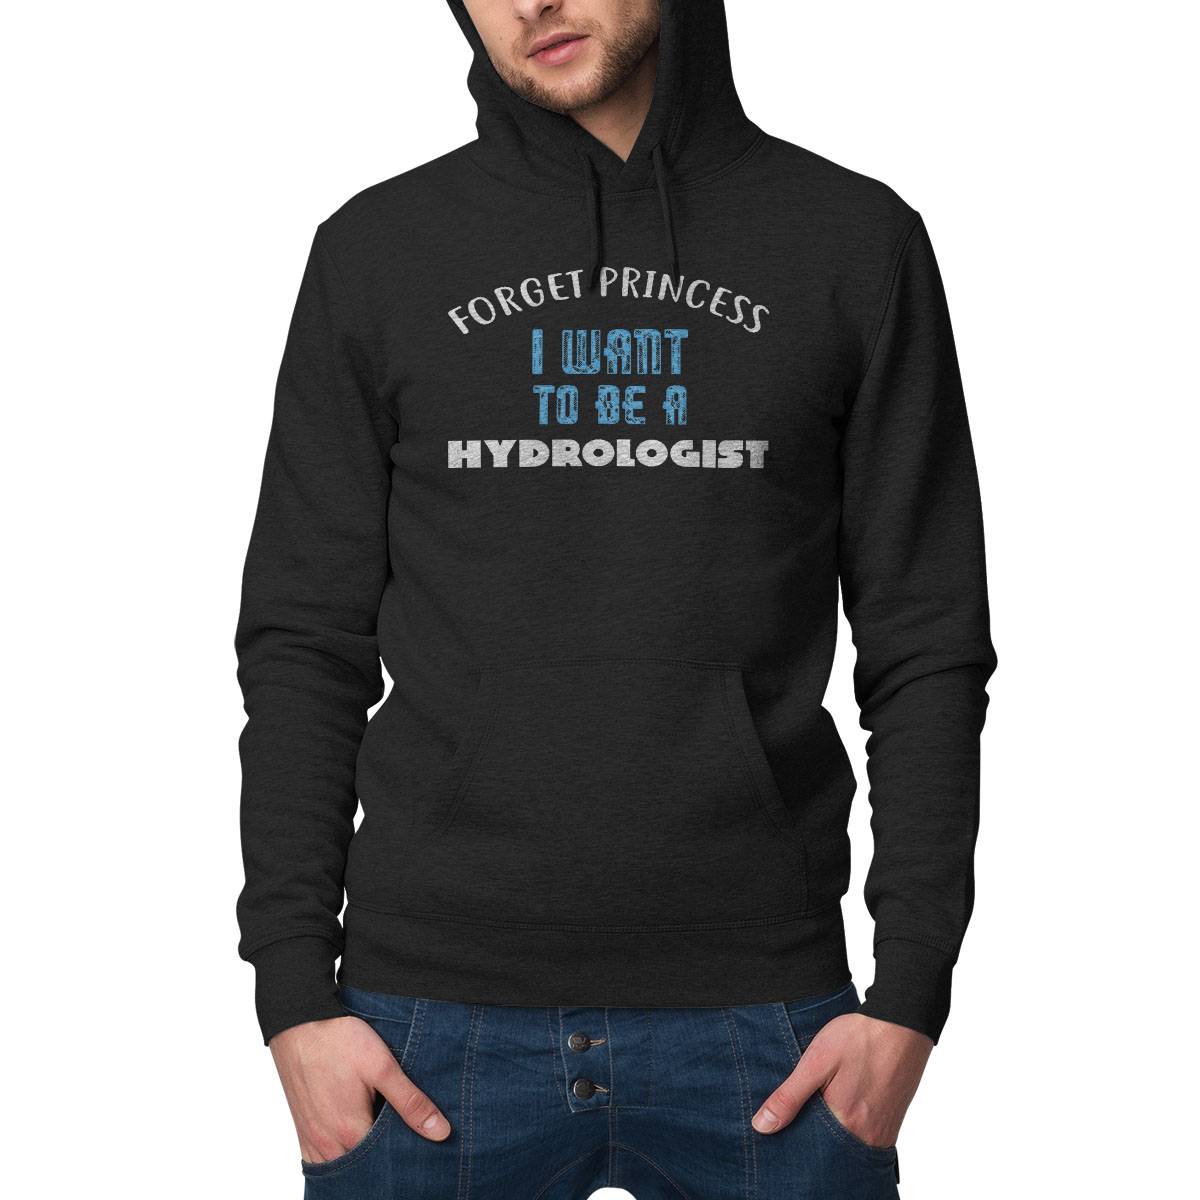 Forget Princess I Want To Be A Hydrologist T-Shirt